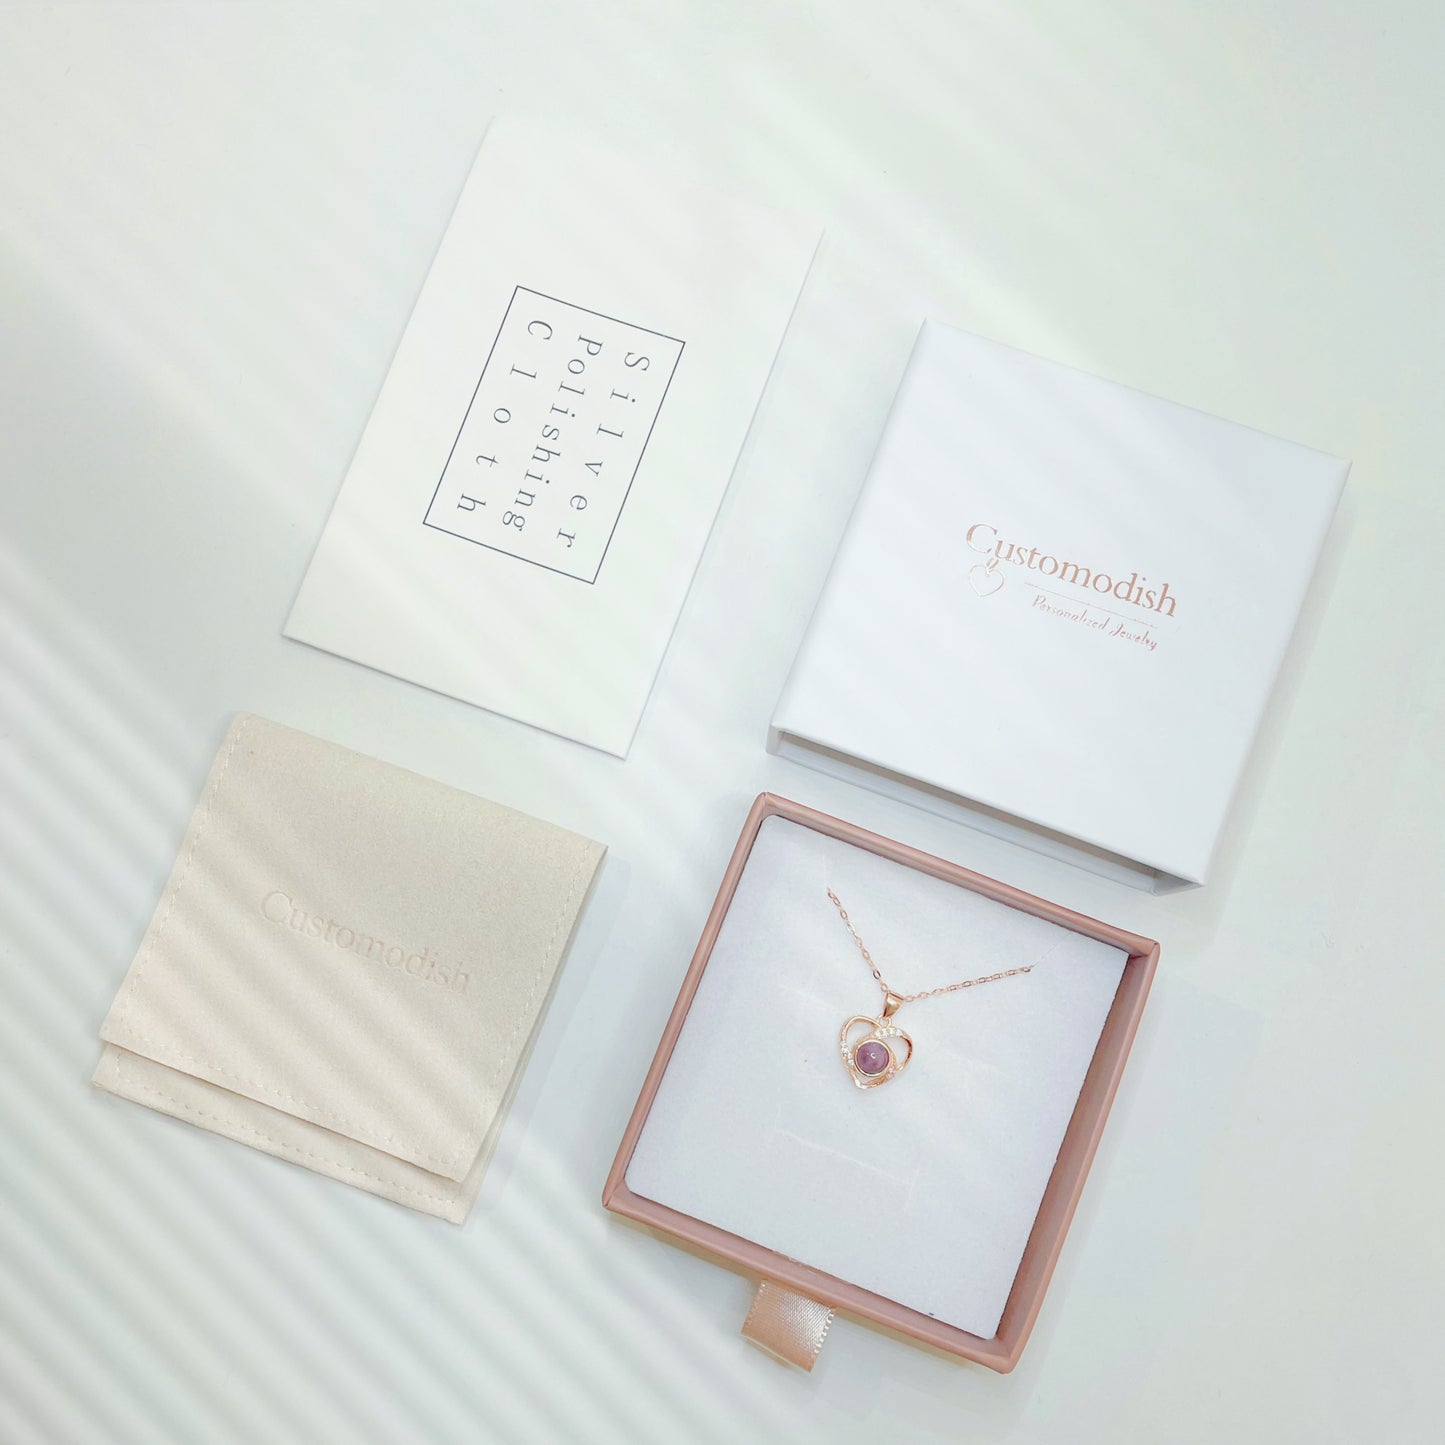 Customodish jewelry packaging include a jewelry box, a jewelry pouch and a silver polishing cloth.